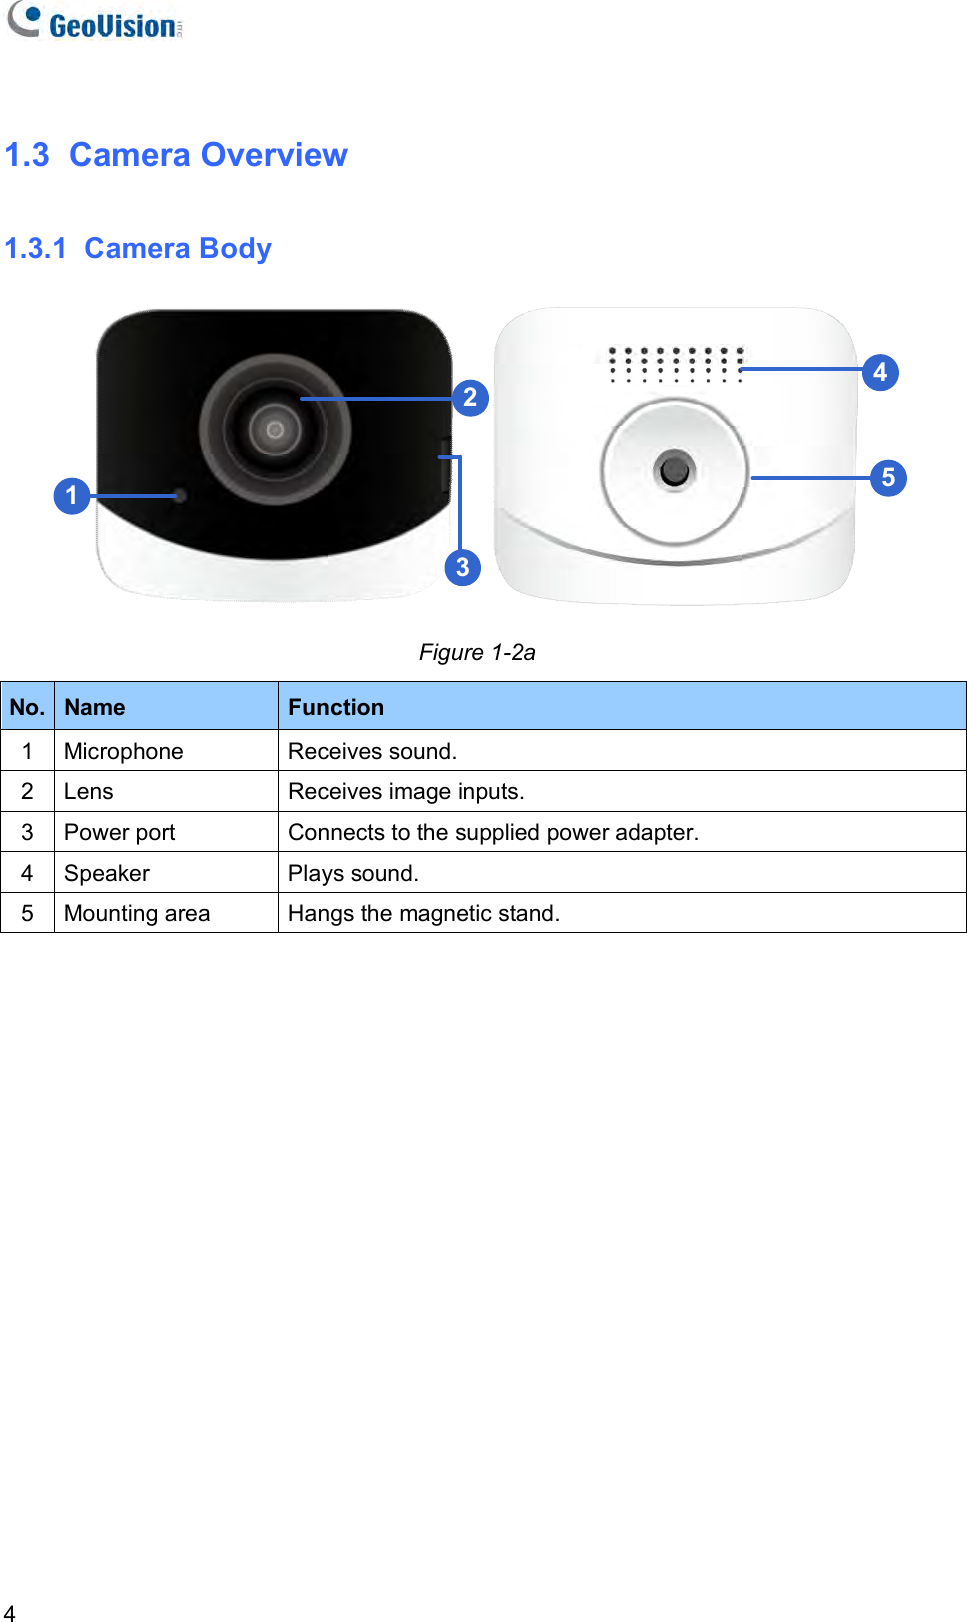   4 1.3  Camera Overview 1.3.1  Camera Body  12345 Figure 1-2a No. Name   Function  1  Microphone  Receives sound. 2  Lens  Receives image inputs. 3  Power port  Connects to the supplied power adapter. 4  Speaker  Plays sound. 5  Mounting area  Hangs the magnetic stand.  